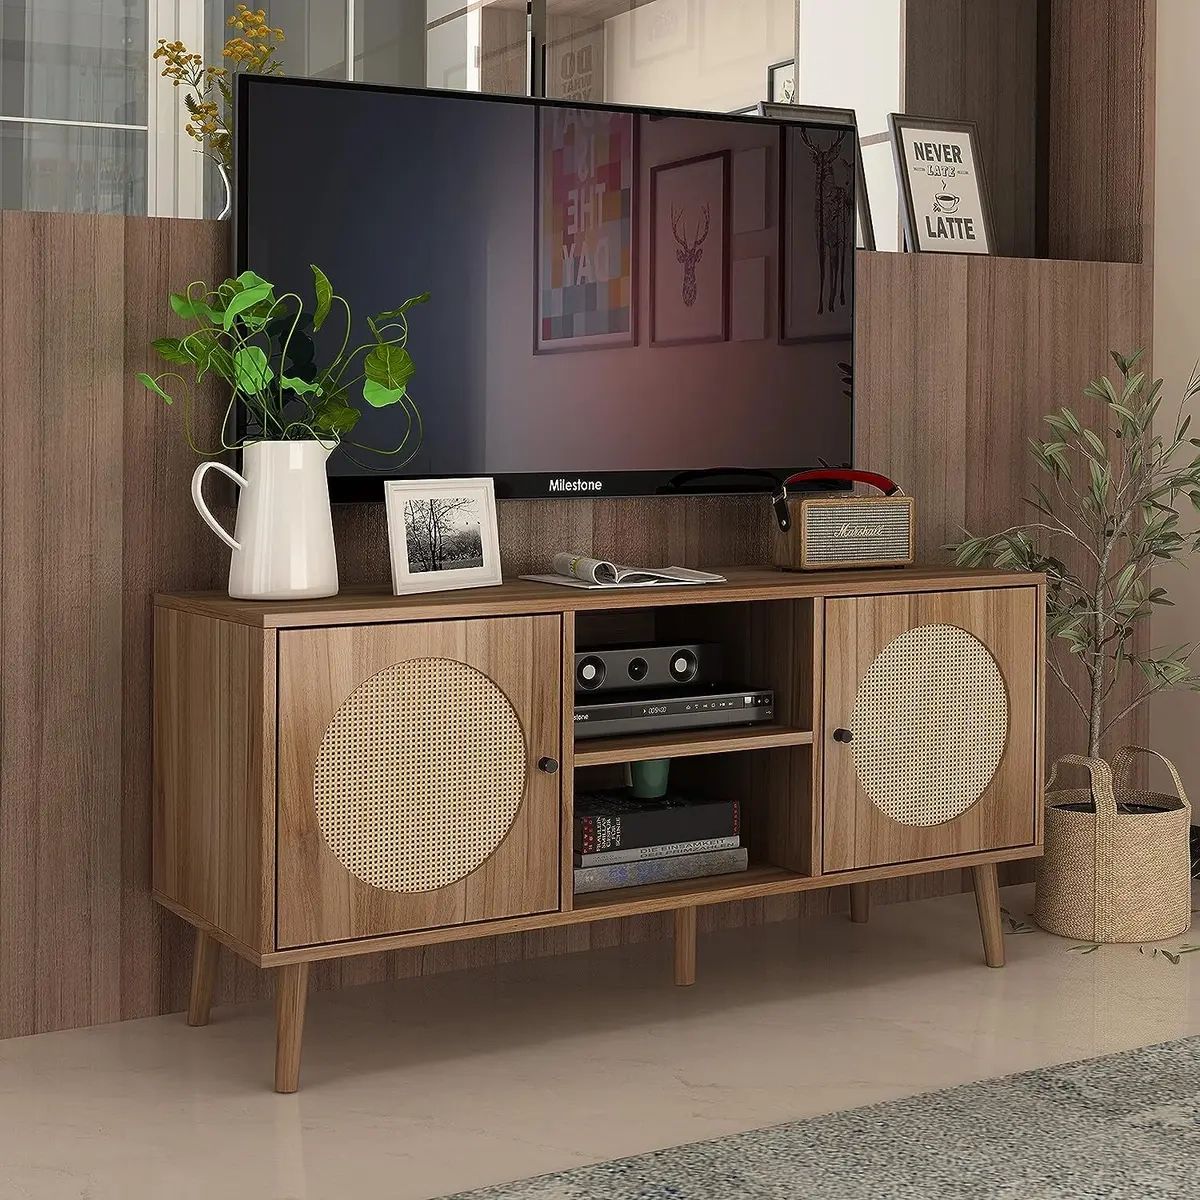 Orrd Farmhouse Rattan Tv Stand For Tvs Up To 52 Inch, 43.3 Walnut | Ebay For Farmhouse Rattan Tv Stands (Photo 10 of 15)